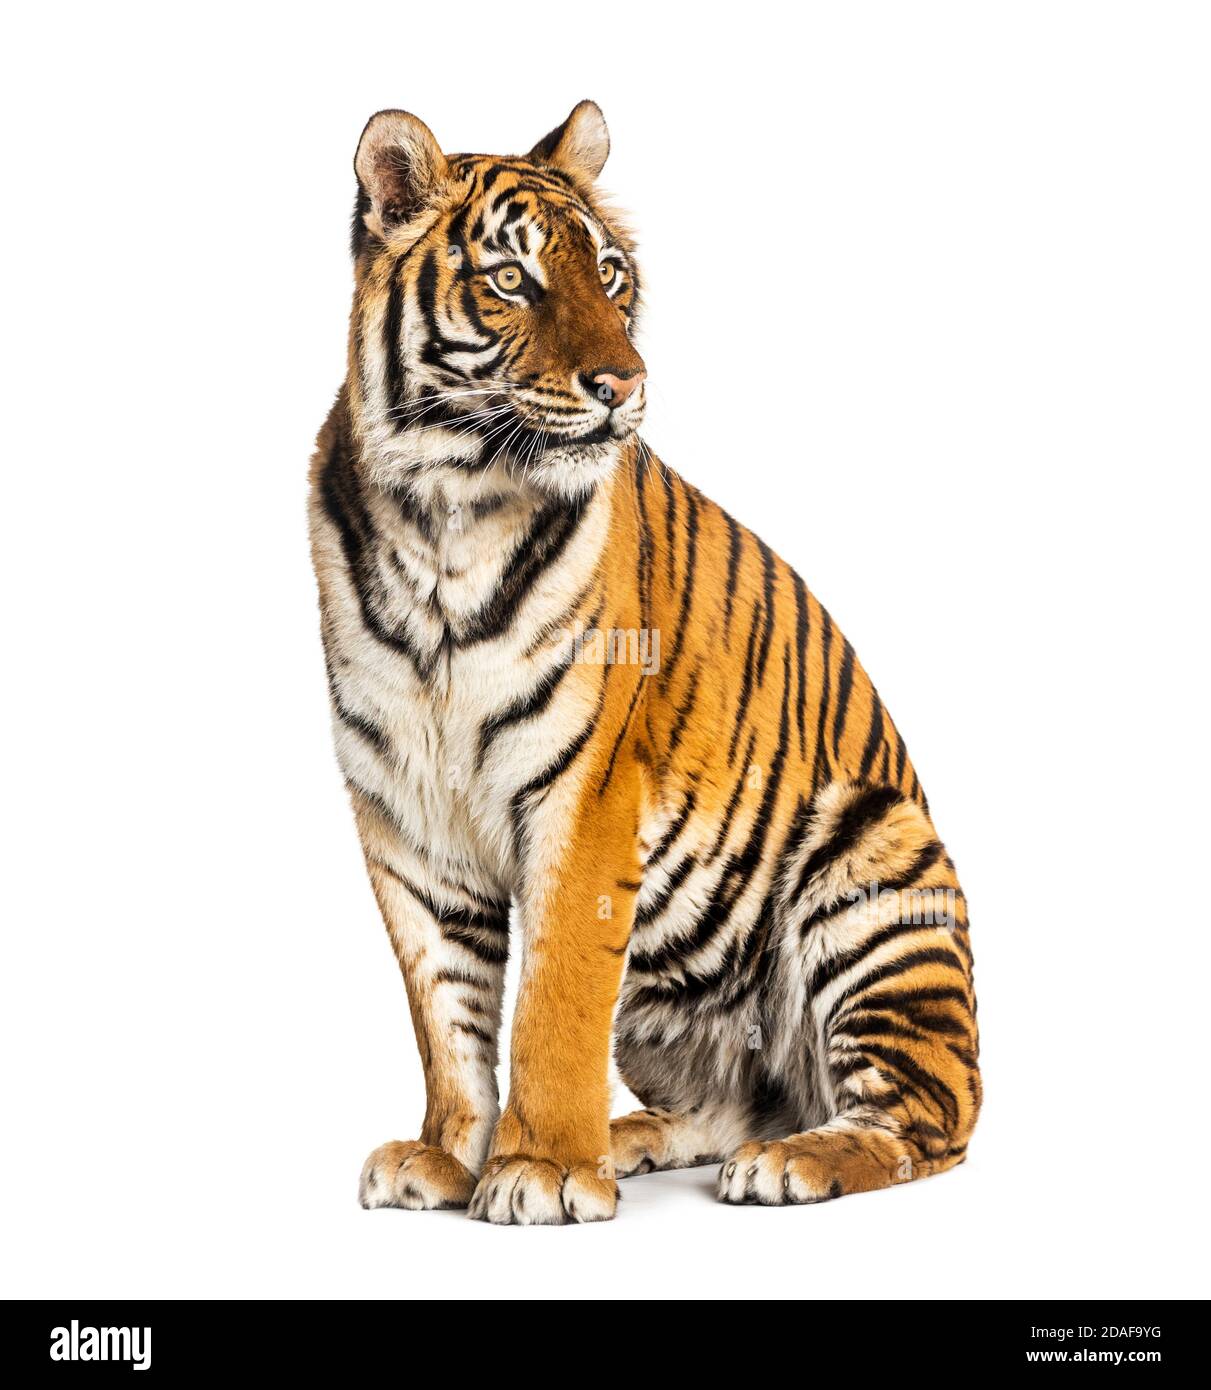 Tiger sitting isolated on white Stock Photo